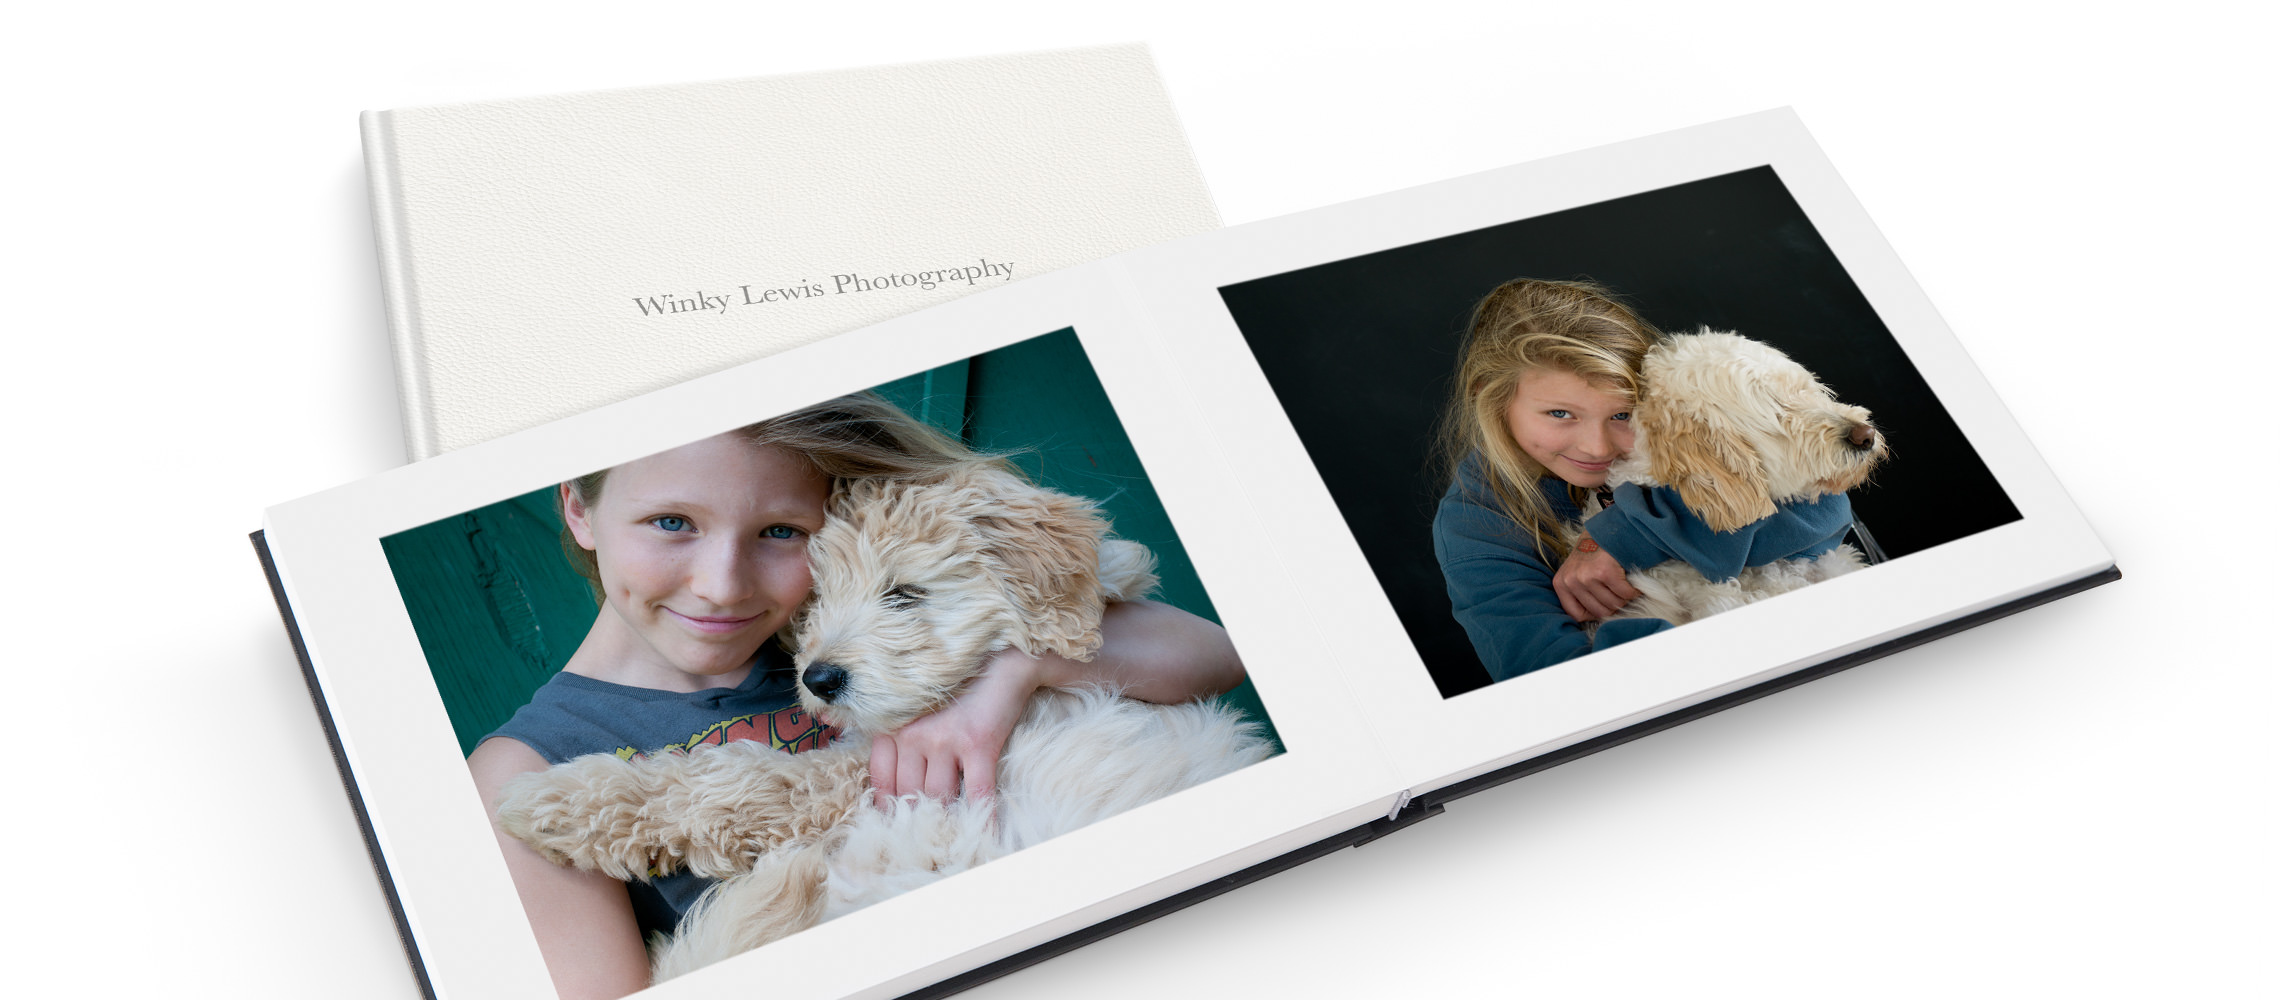 Two leather photo albums. One open showing child and pet photography.